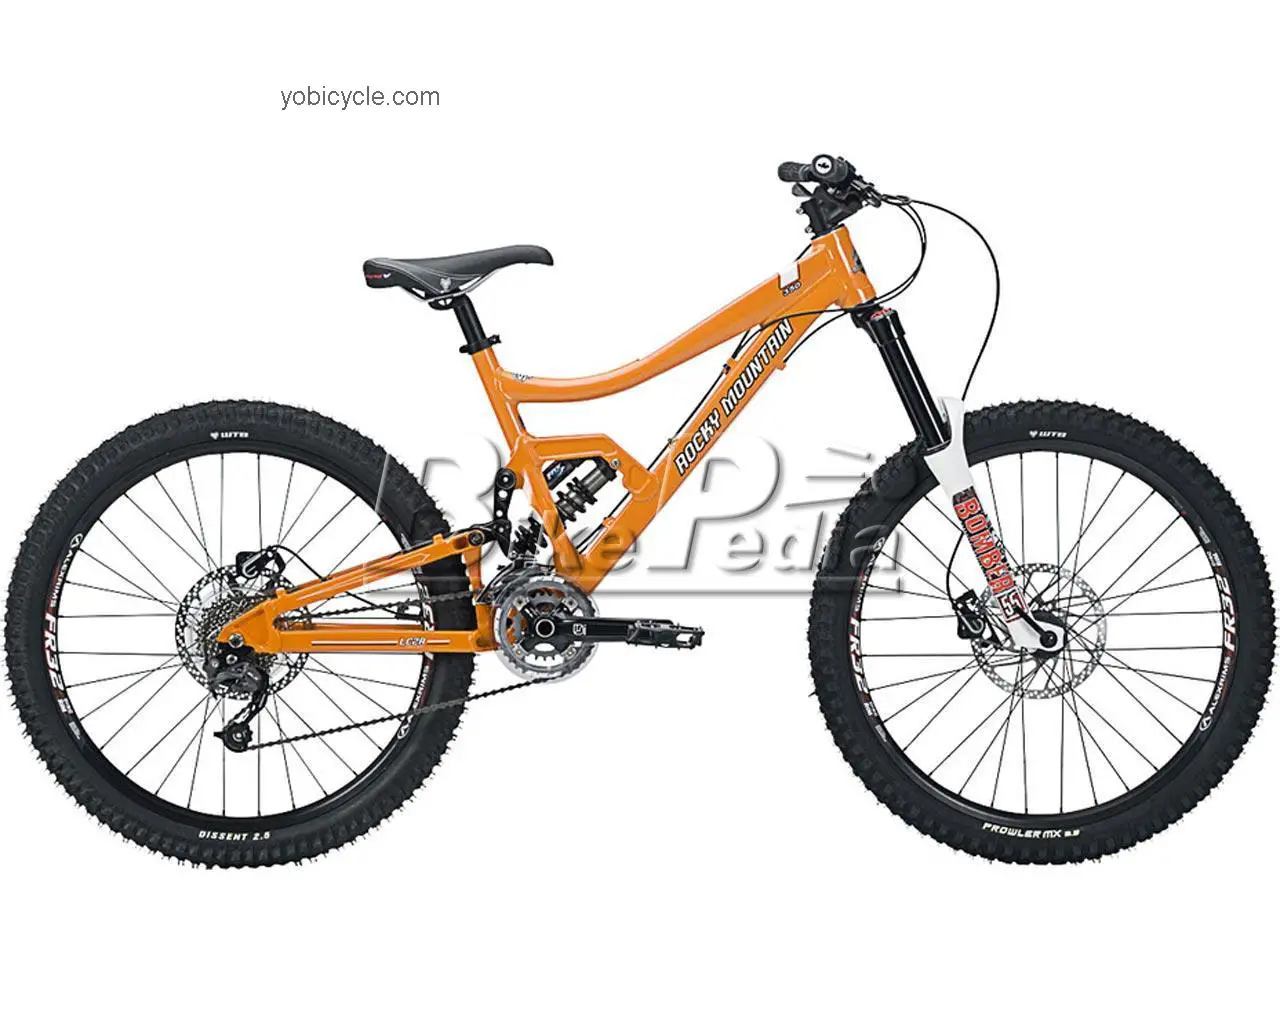 Rocky Mountain Slayer SS 350 2009 comparison online with competitors